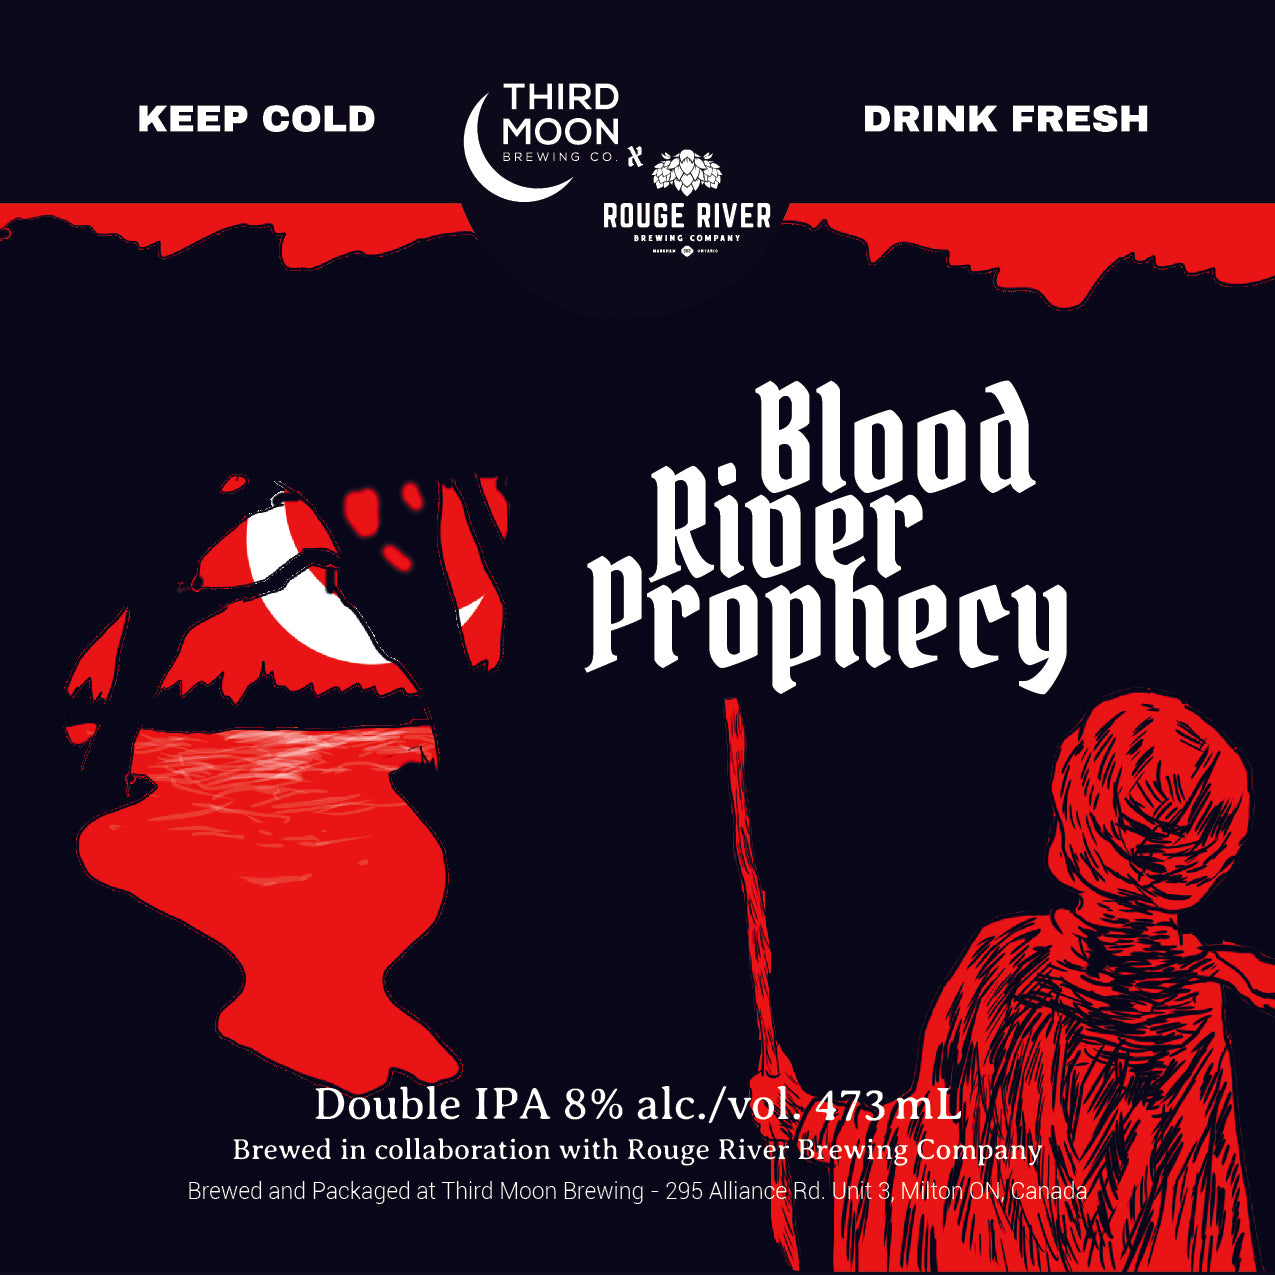 Double IPA - 4-pk of "Blood River Prophecy" tall cans